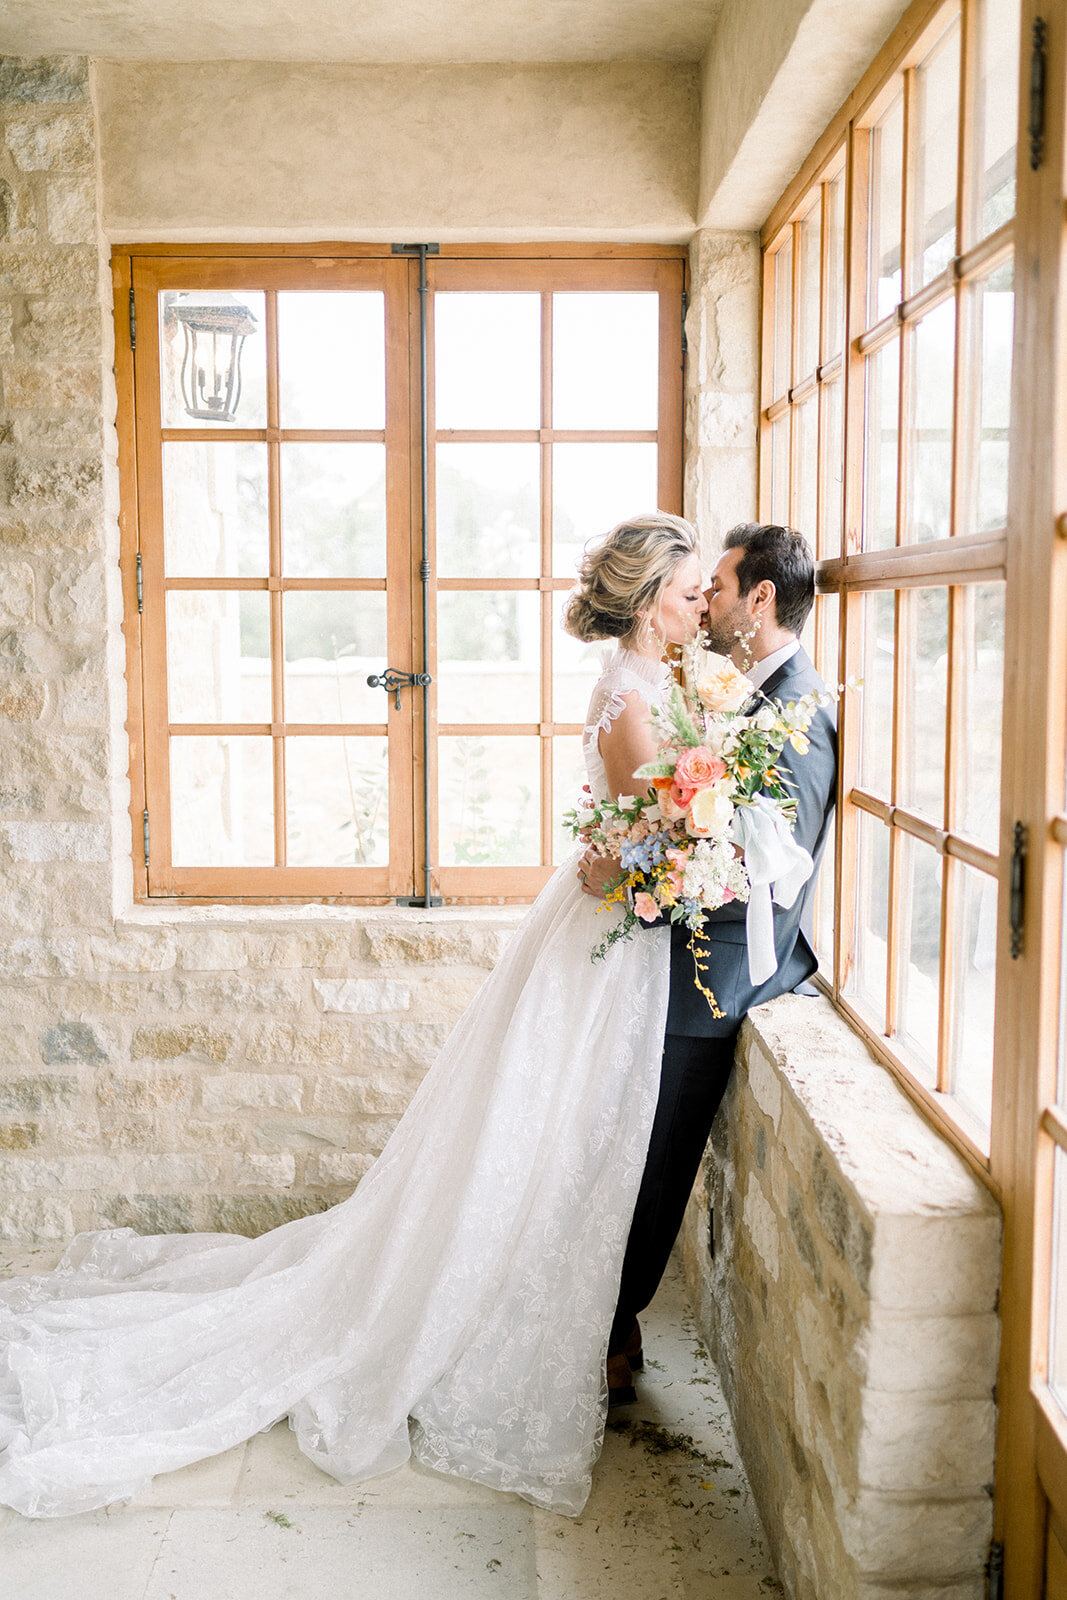 Couple kissing in the window at their Sunstone Winery wedding in Santa Ynez, CA